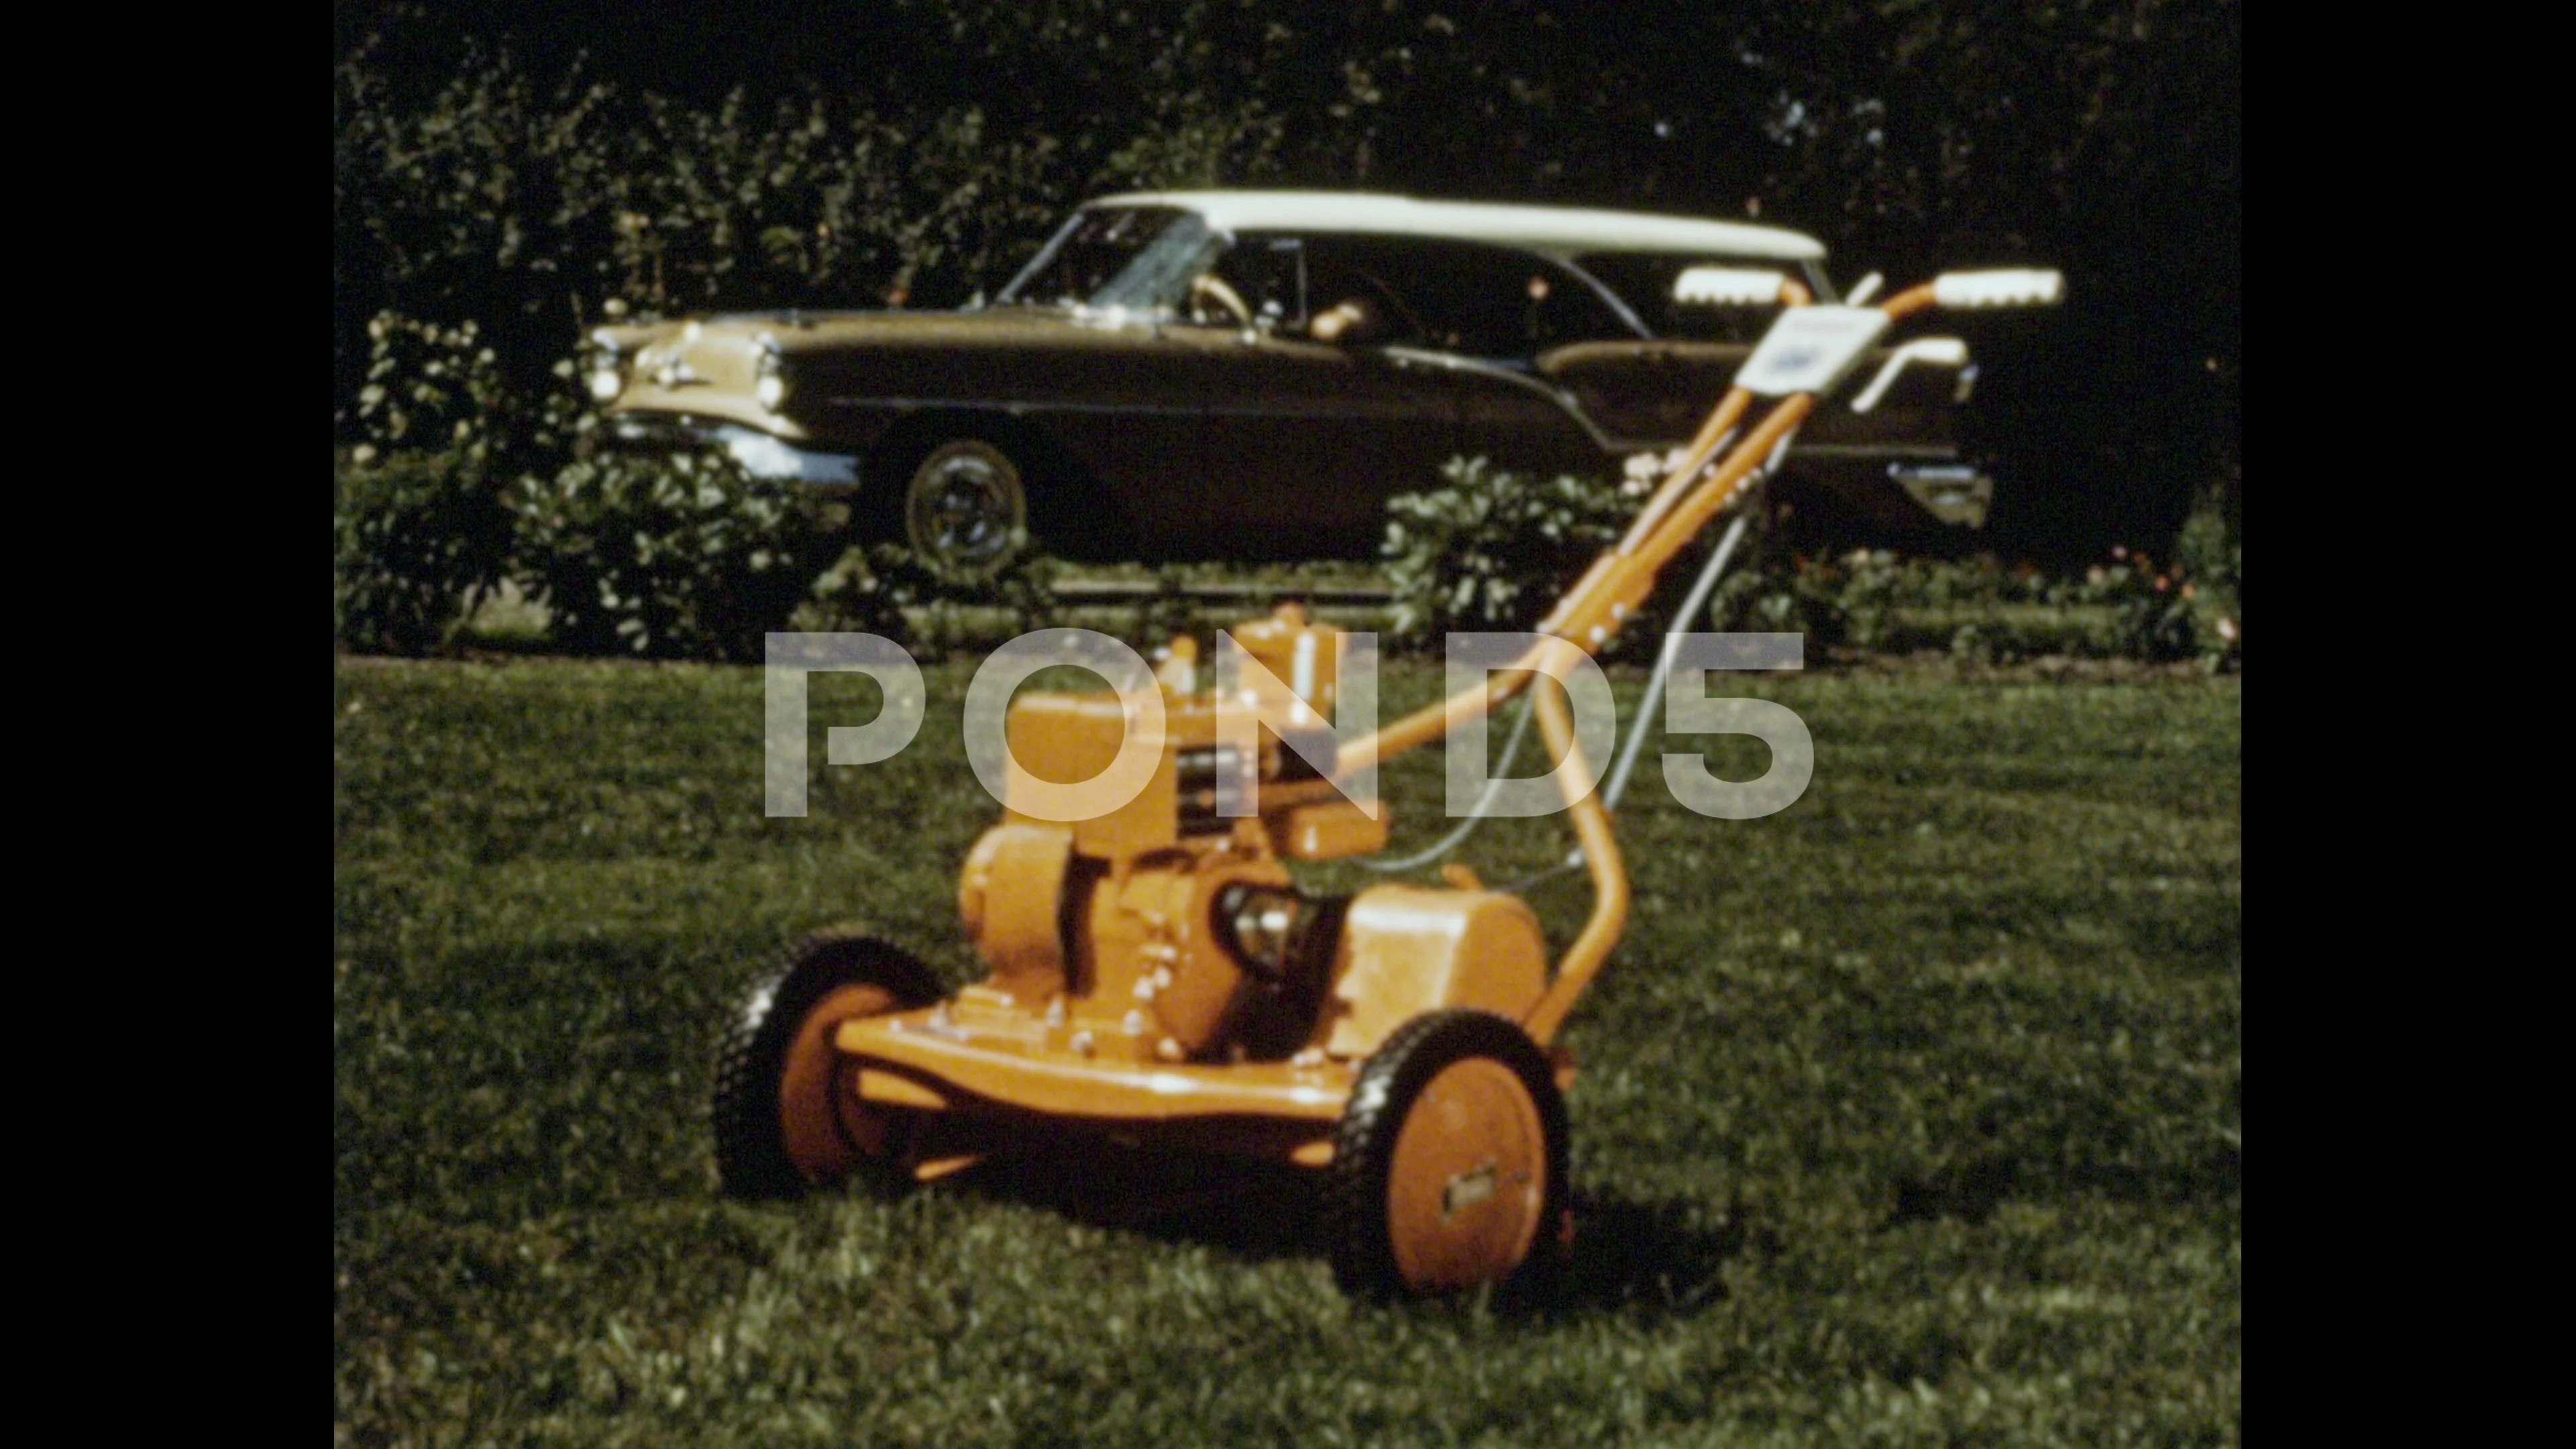 1960s: A shiny yellow lawnmower on a gra, Stock Video